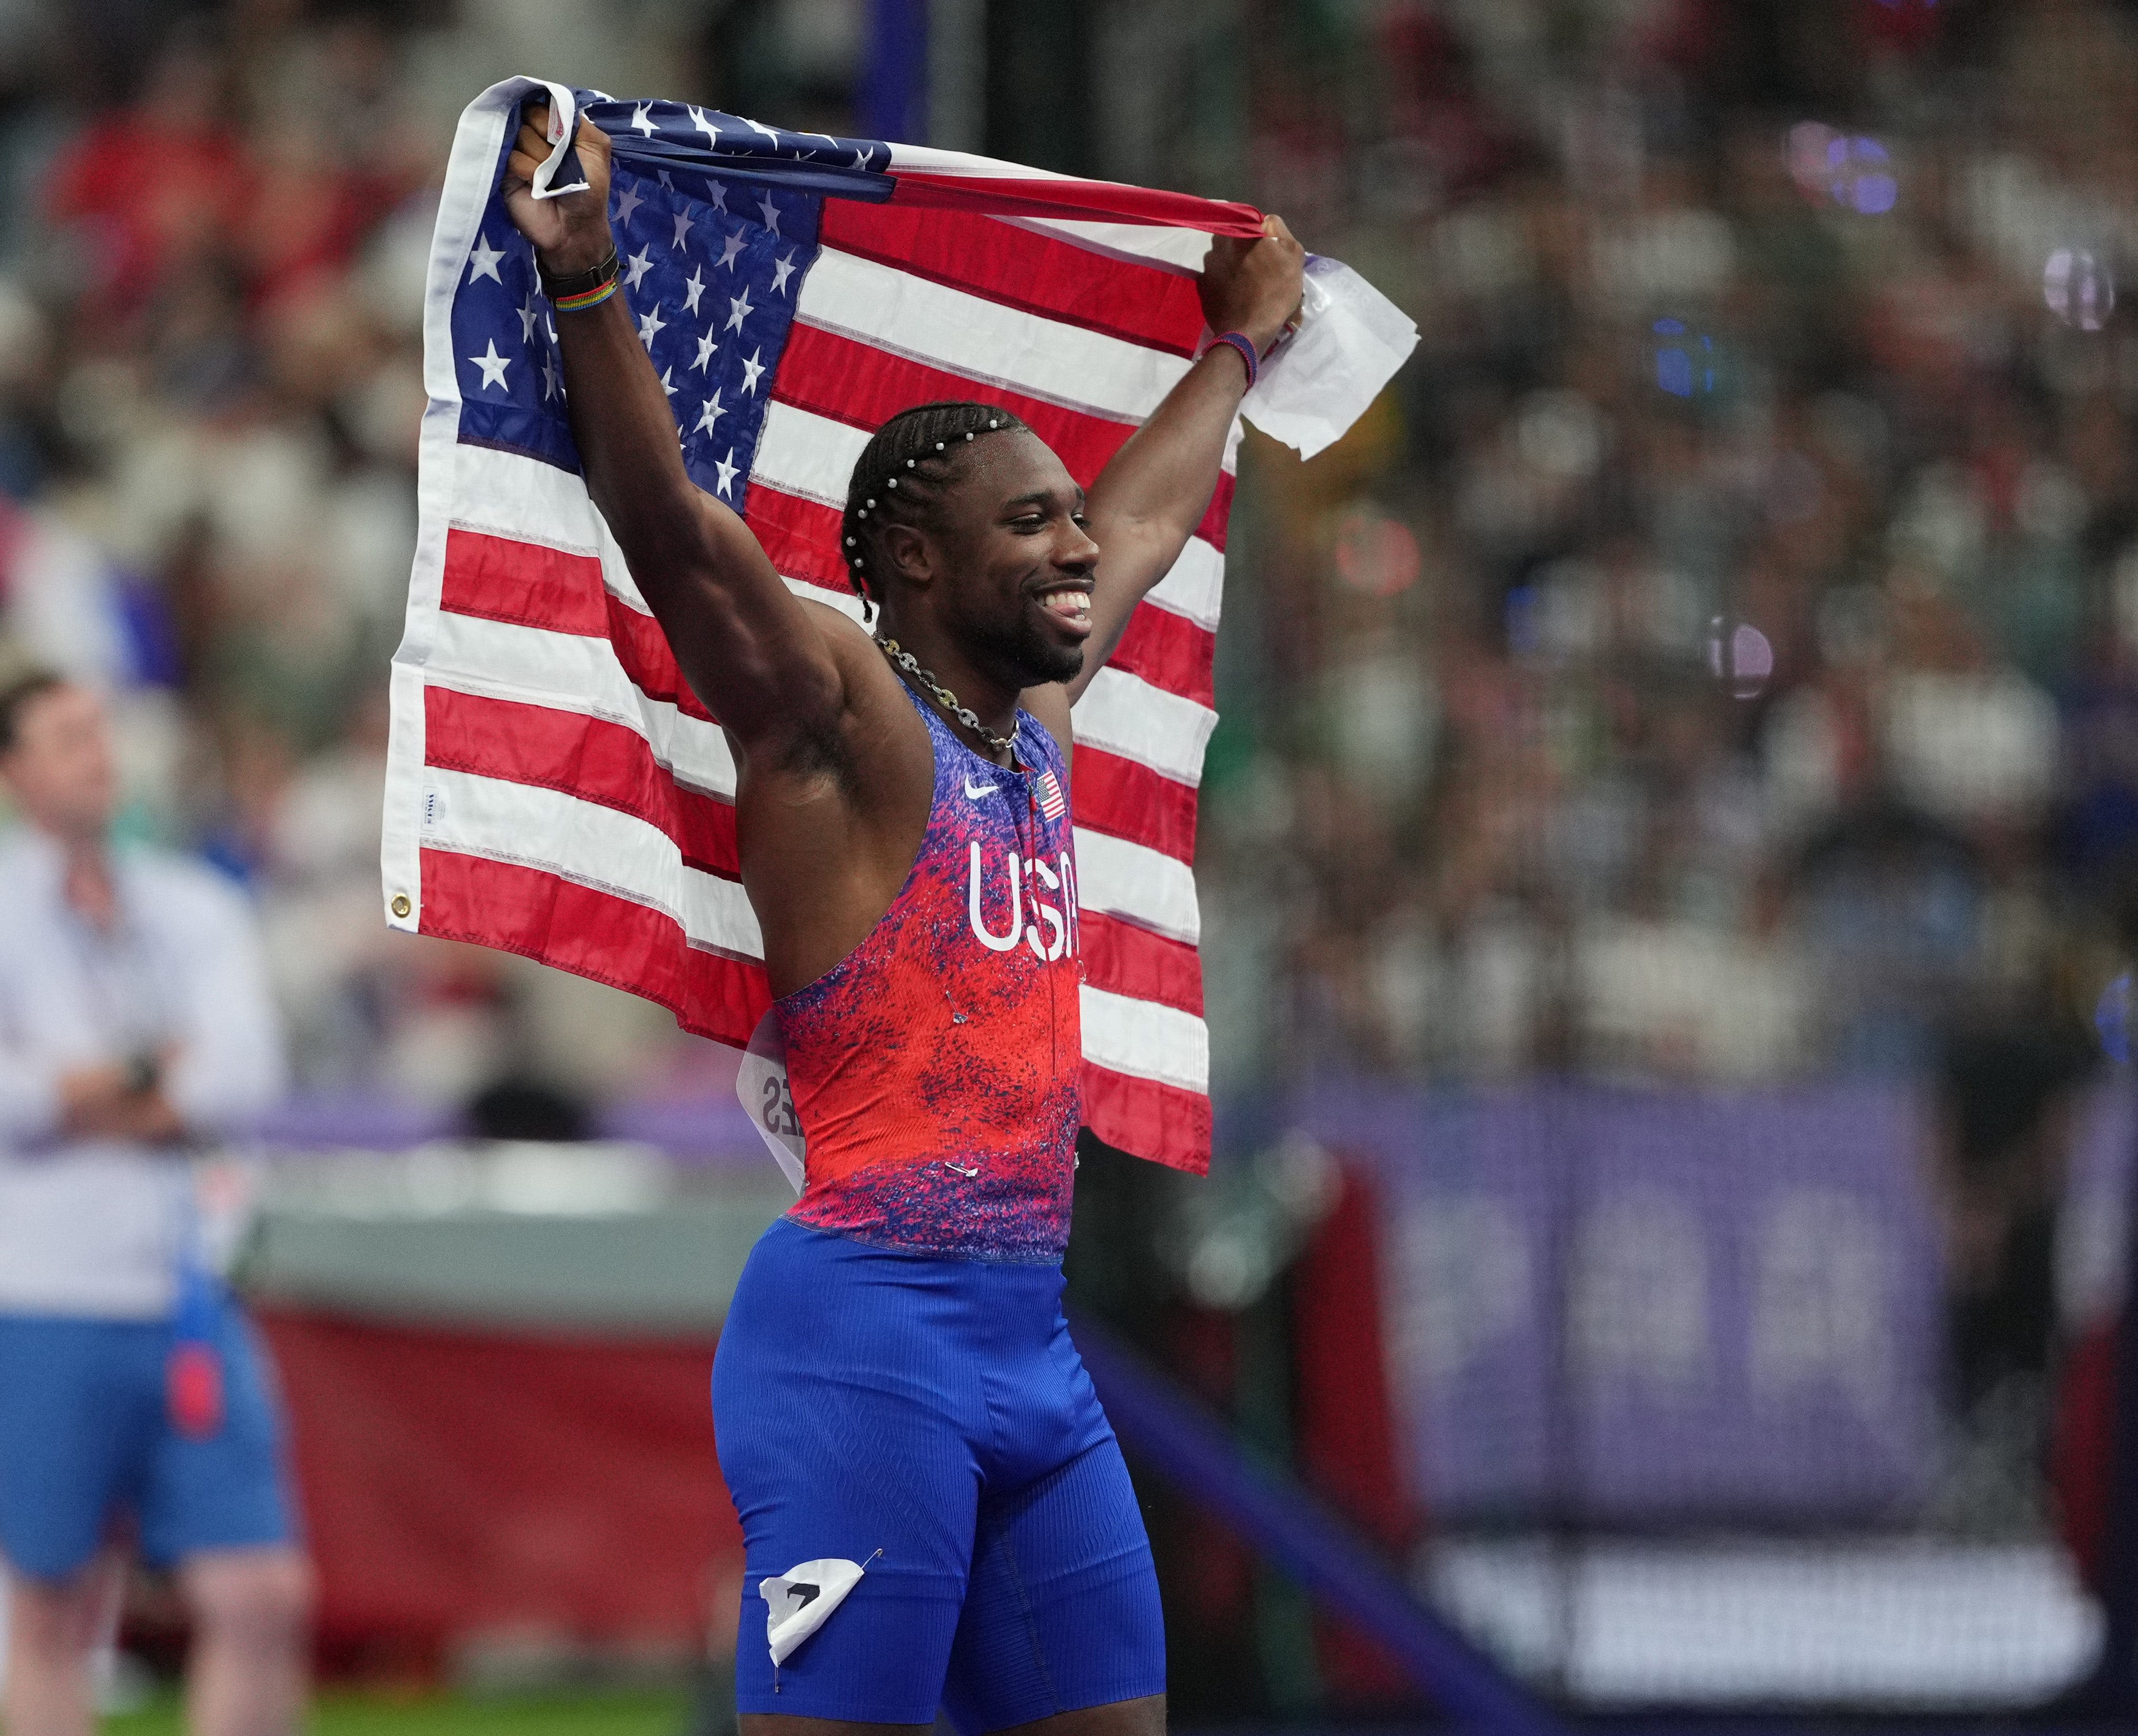 Is Noah Lyles competing today? Olympics track and field schedule, times for Aug. 5